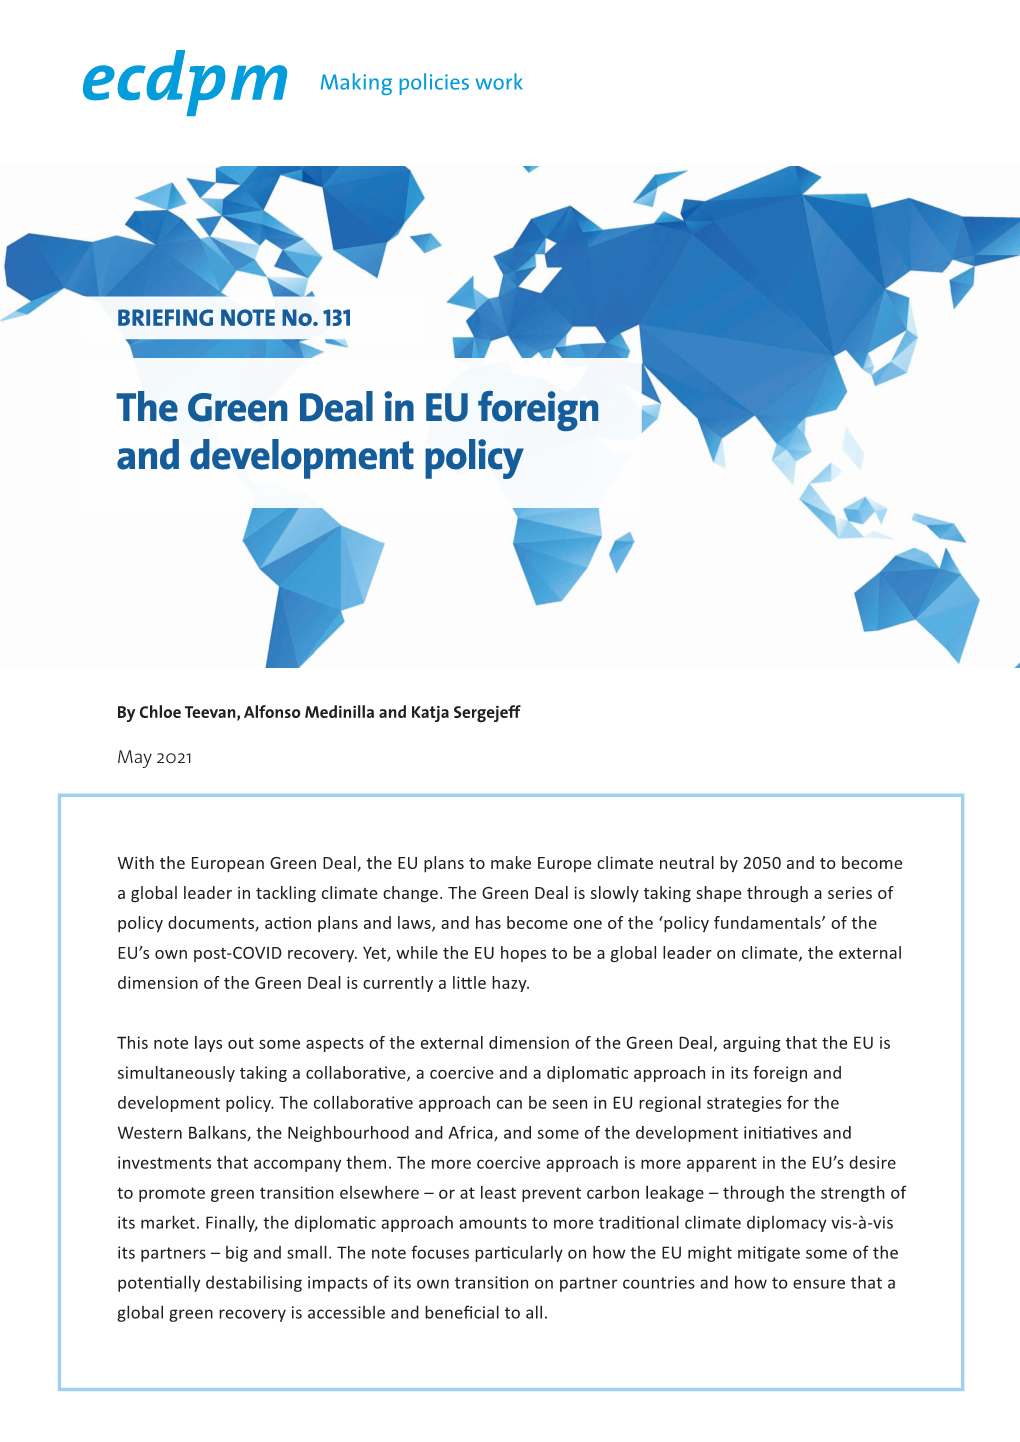 The Green Deal in EU Foreign and Development Policy – ECDPM Briefing Note